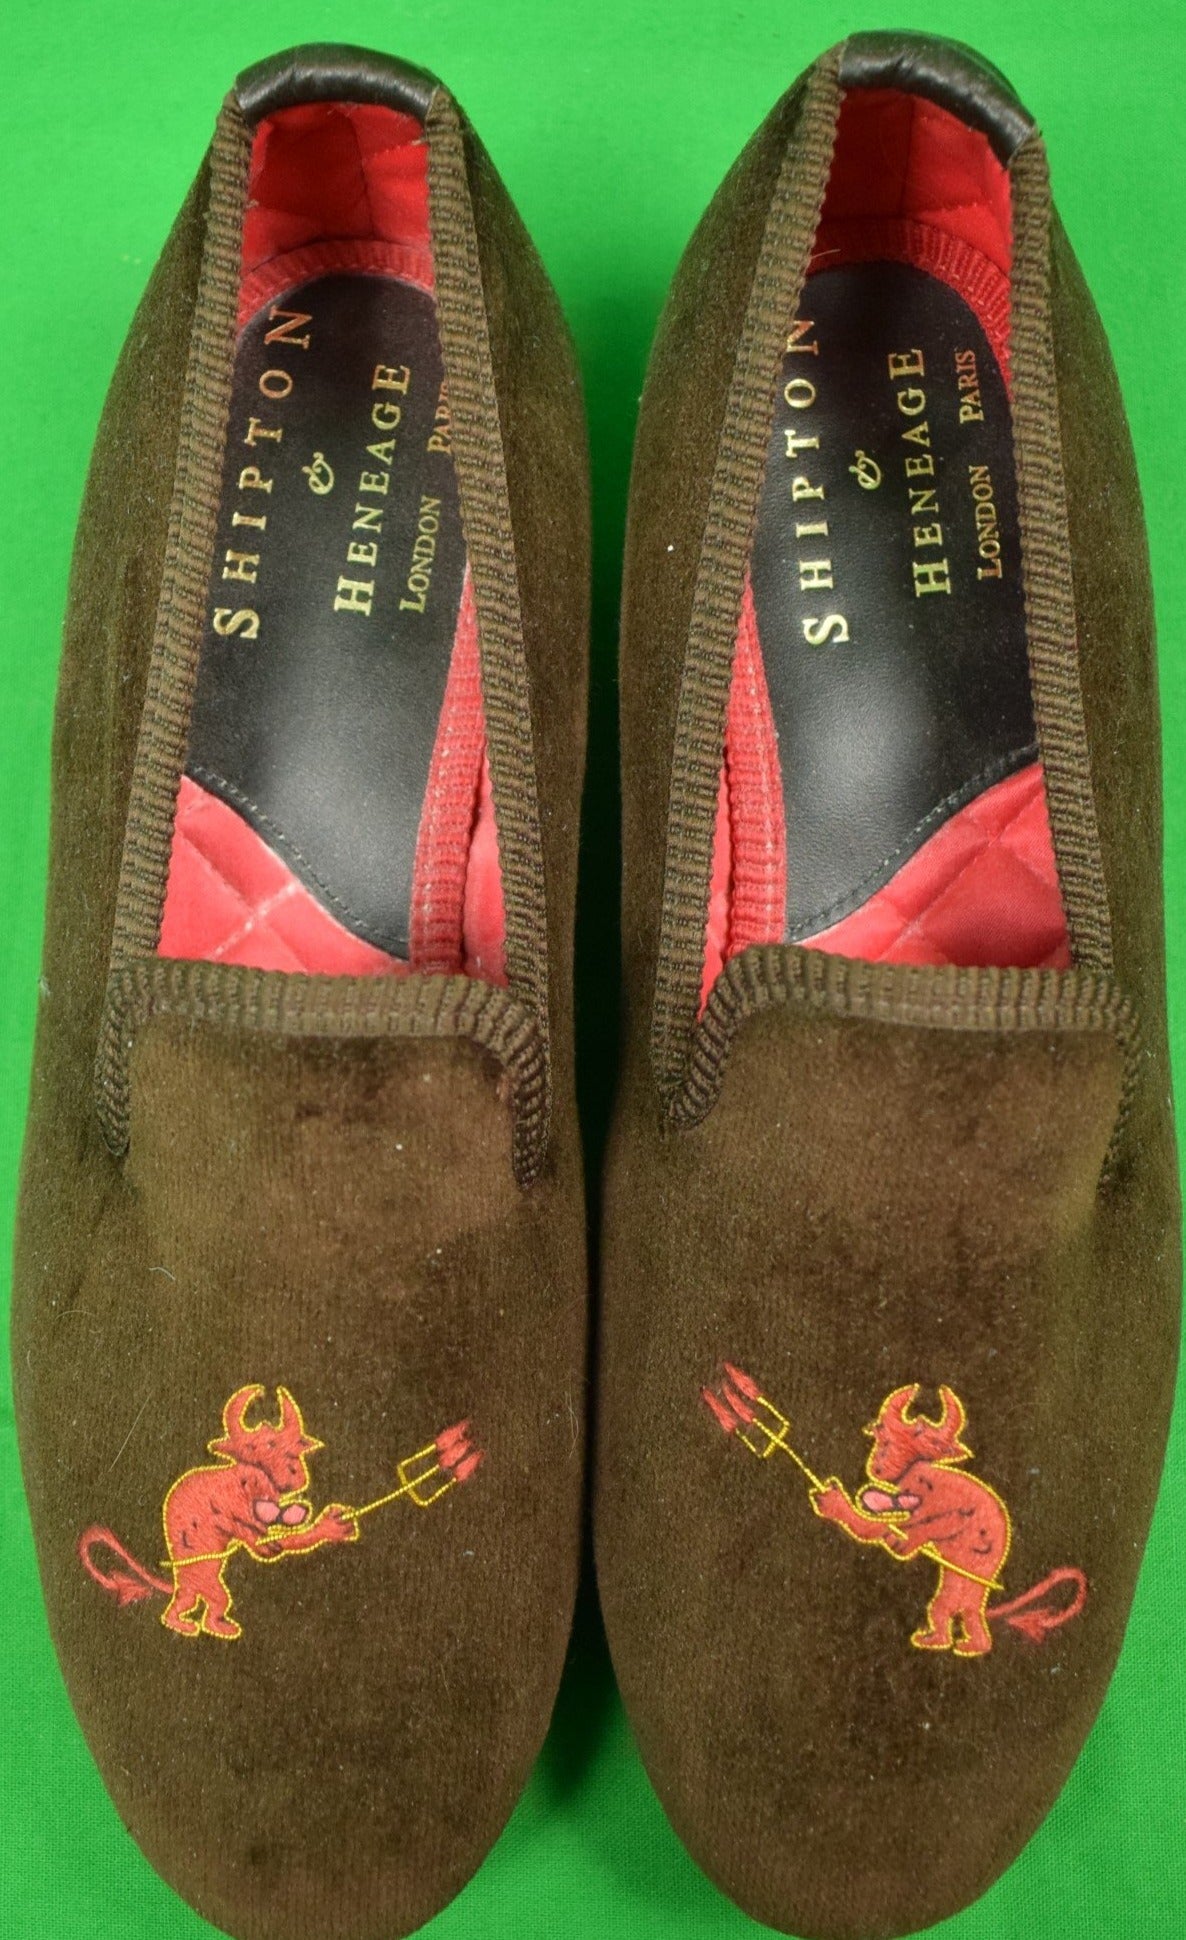 shipton and heneage slippers